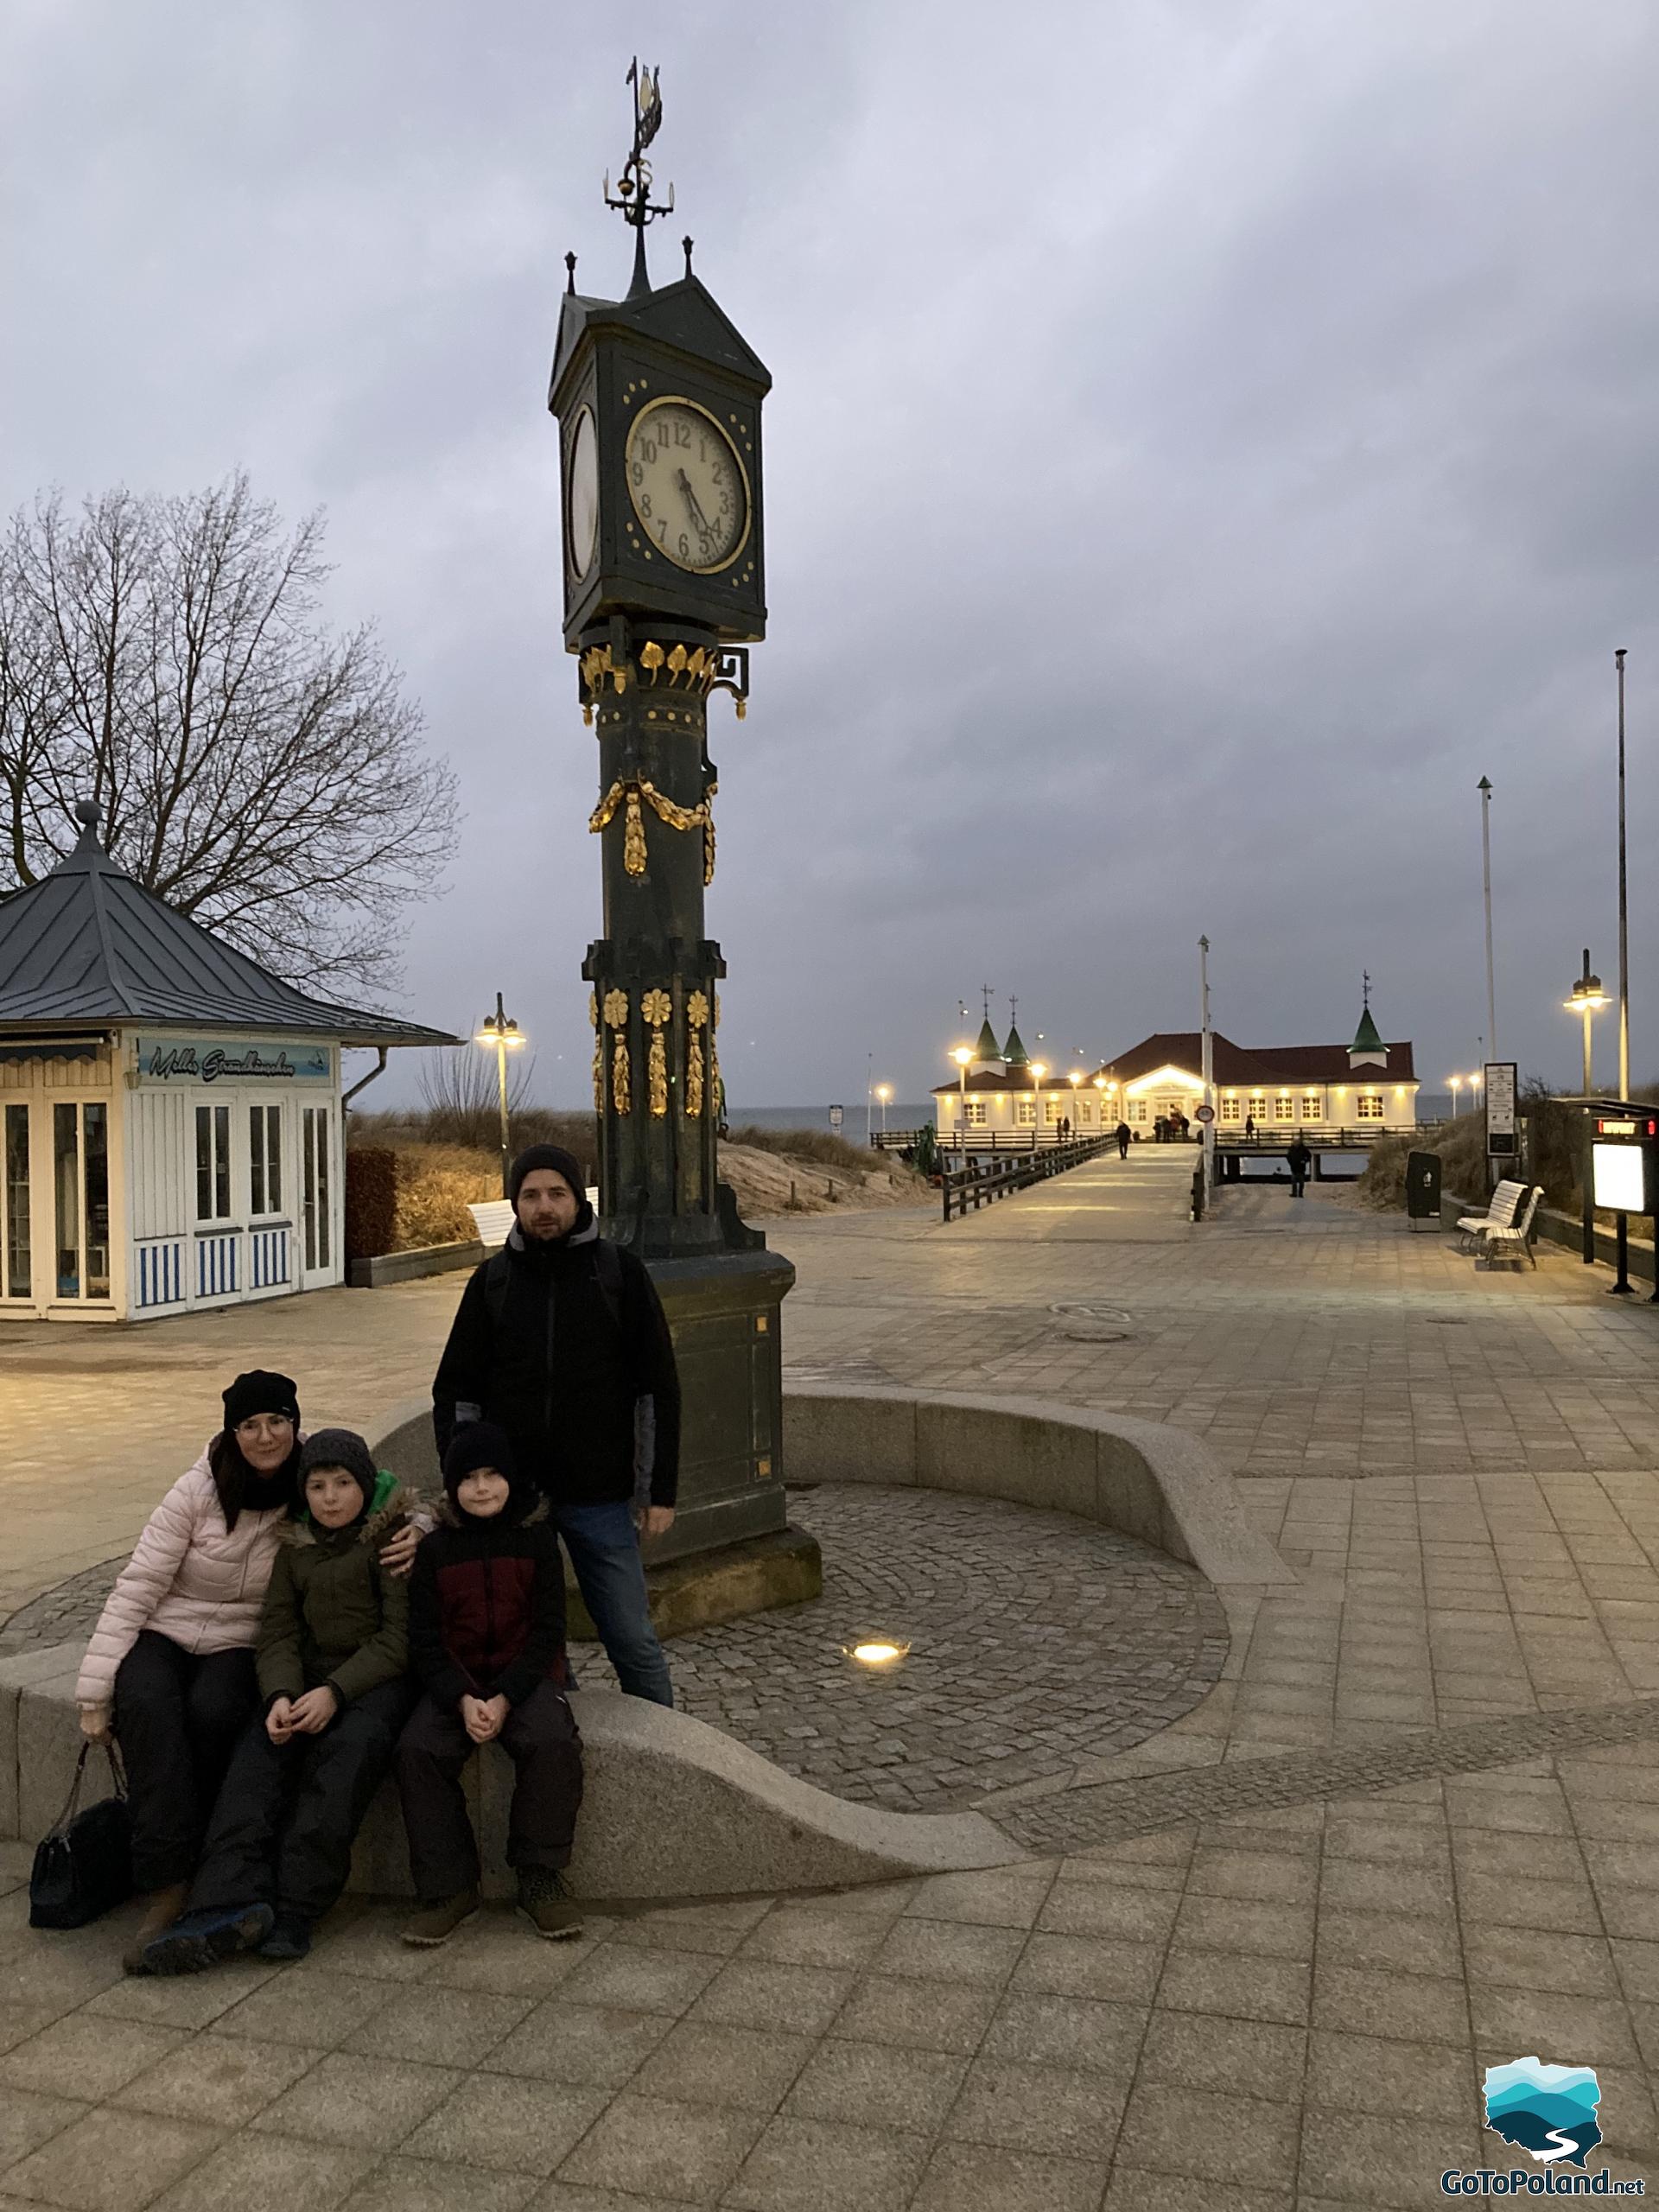 the family is at the historic outdoor clock